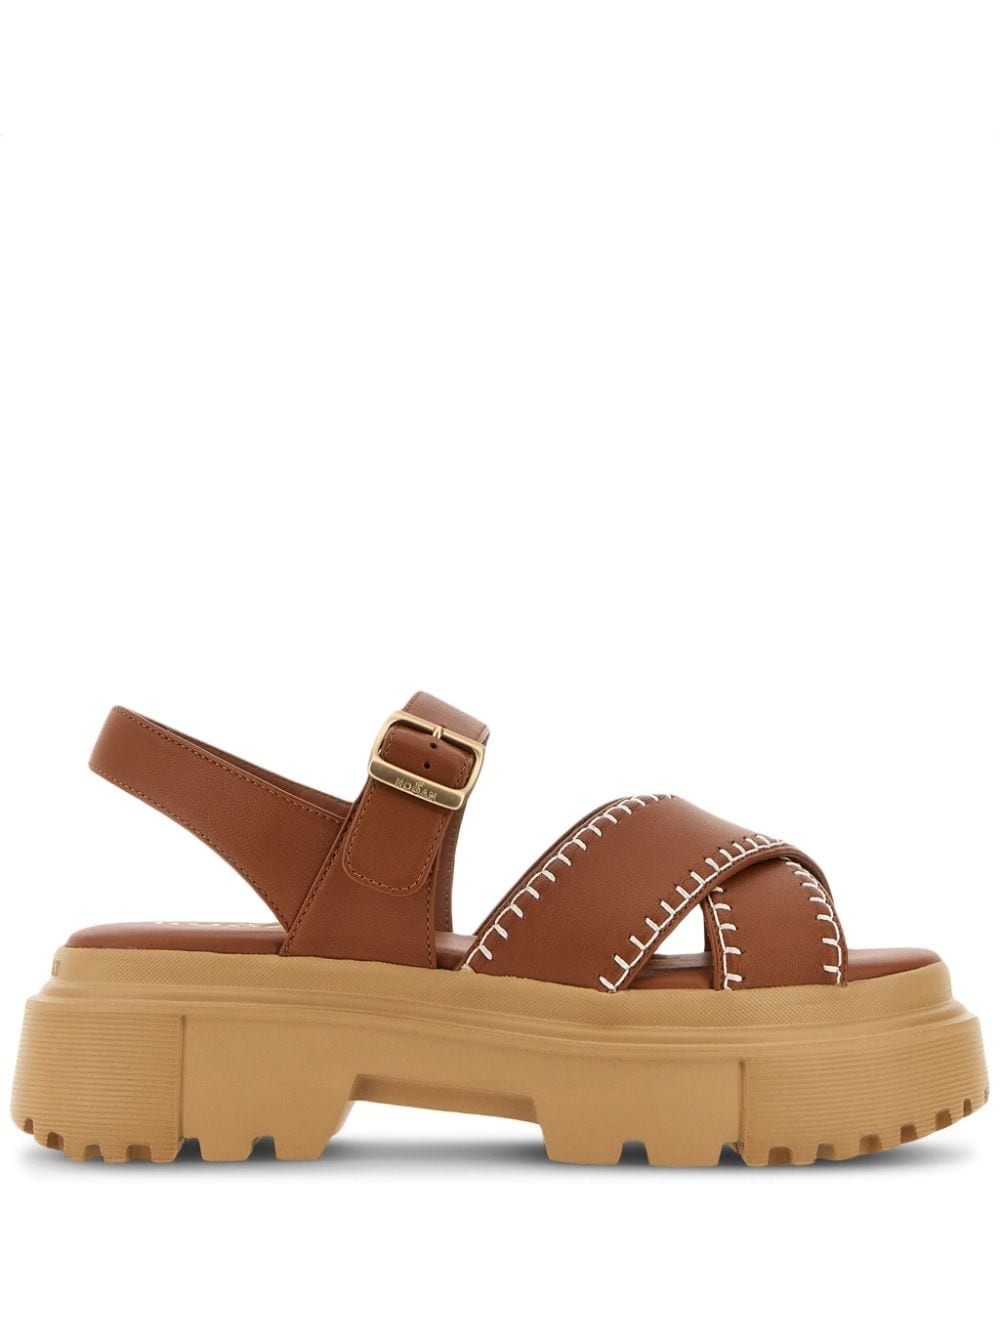 H644 leather sandals - 1